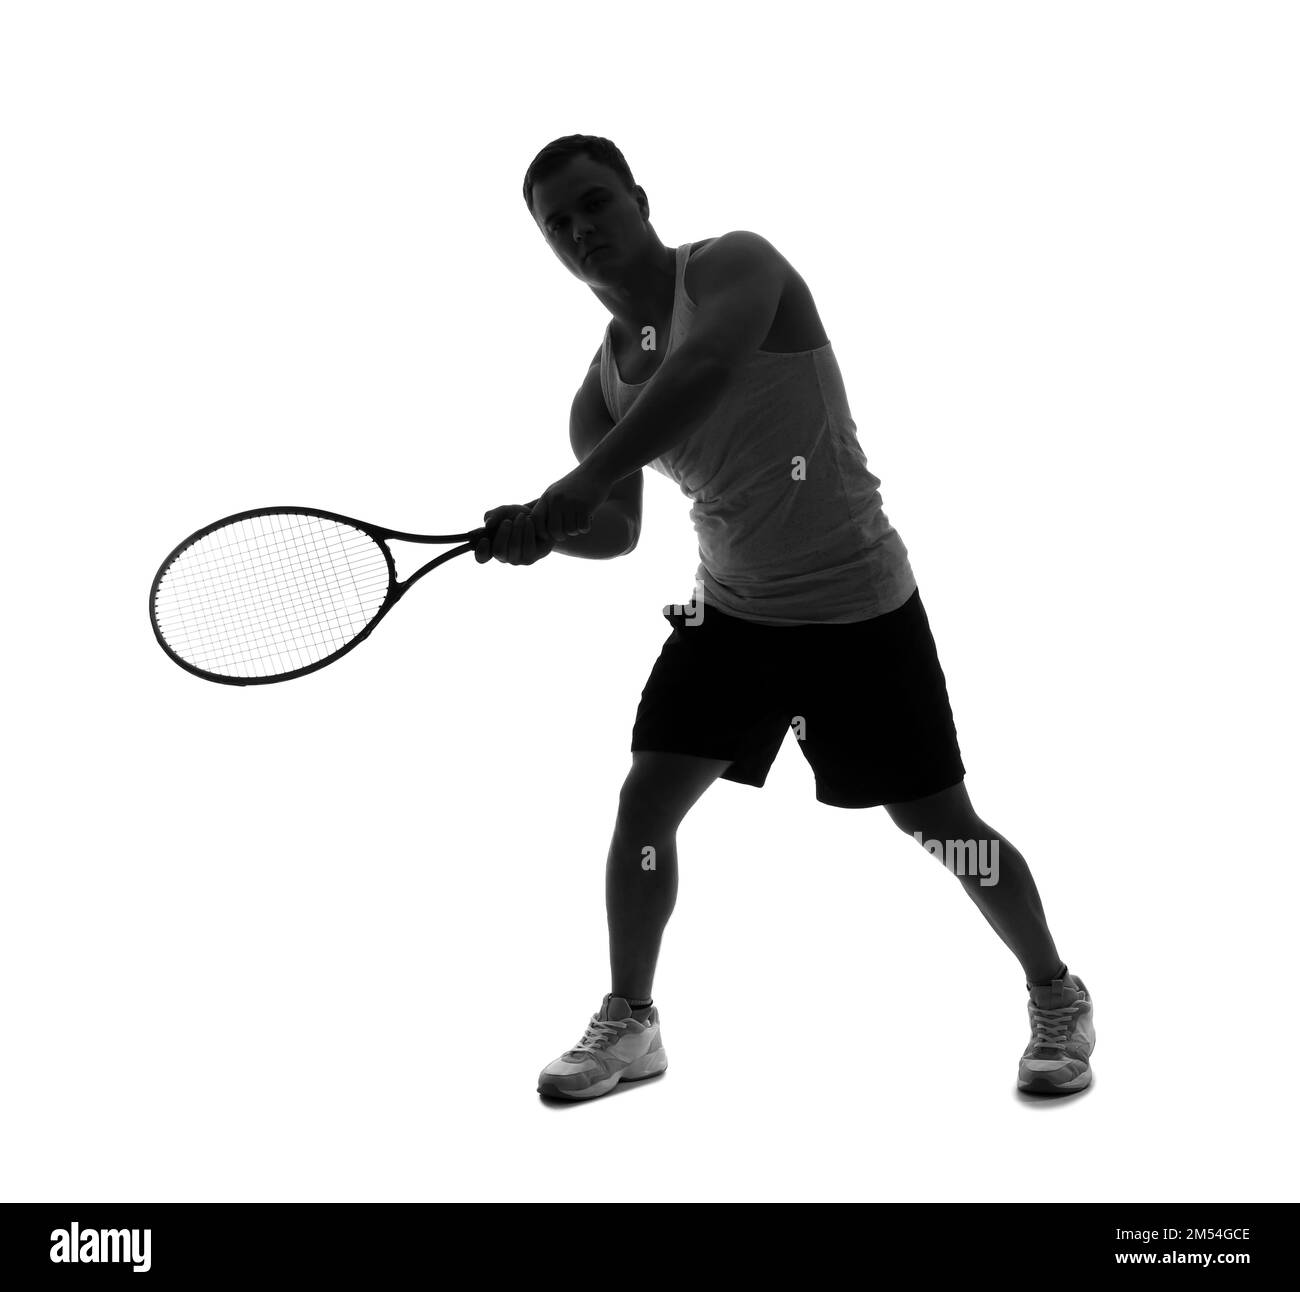 Silhouette of young man with tennis racket on white background Stock Photo